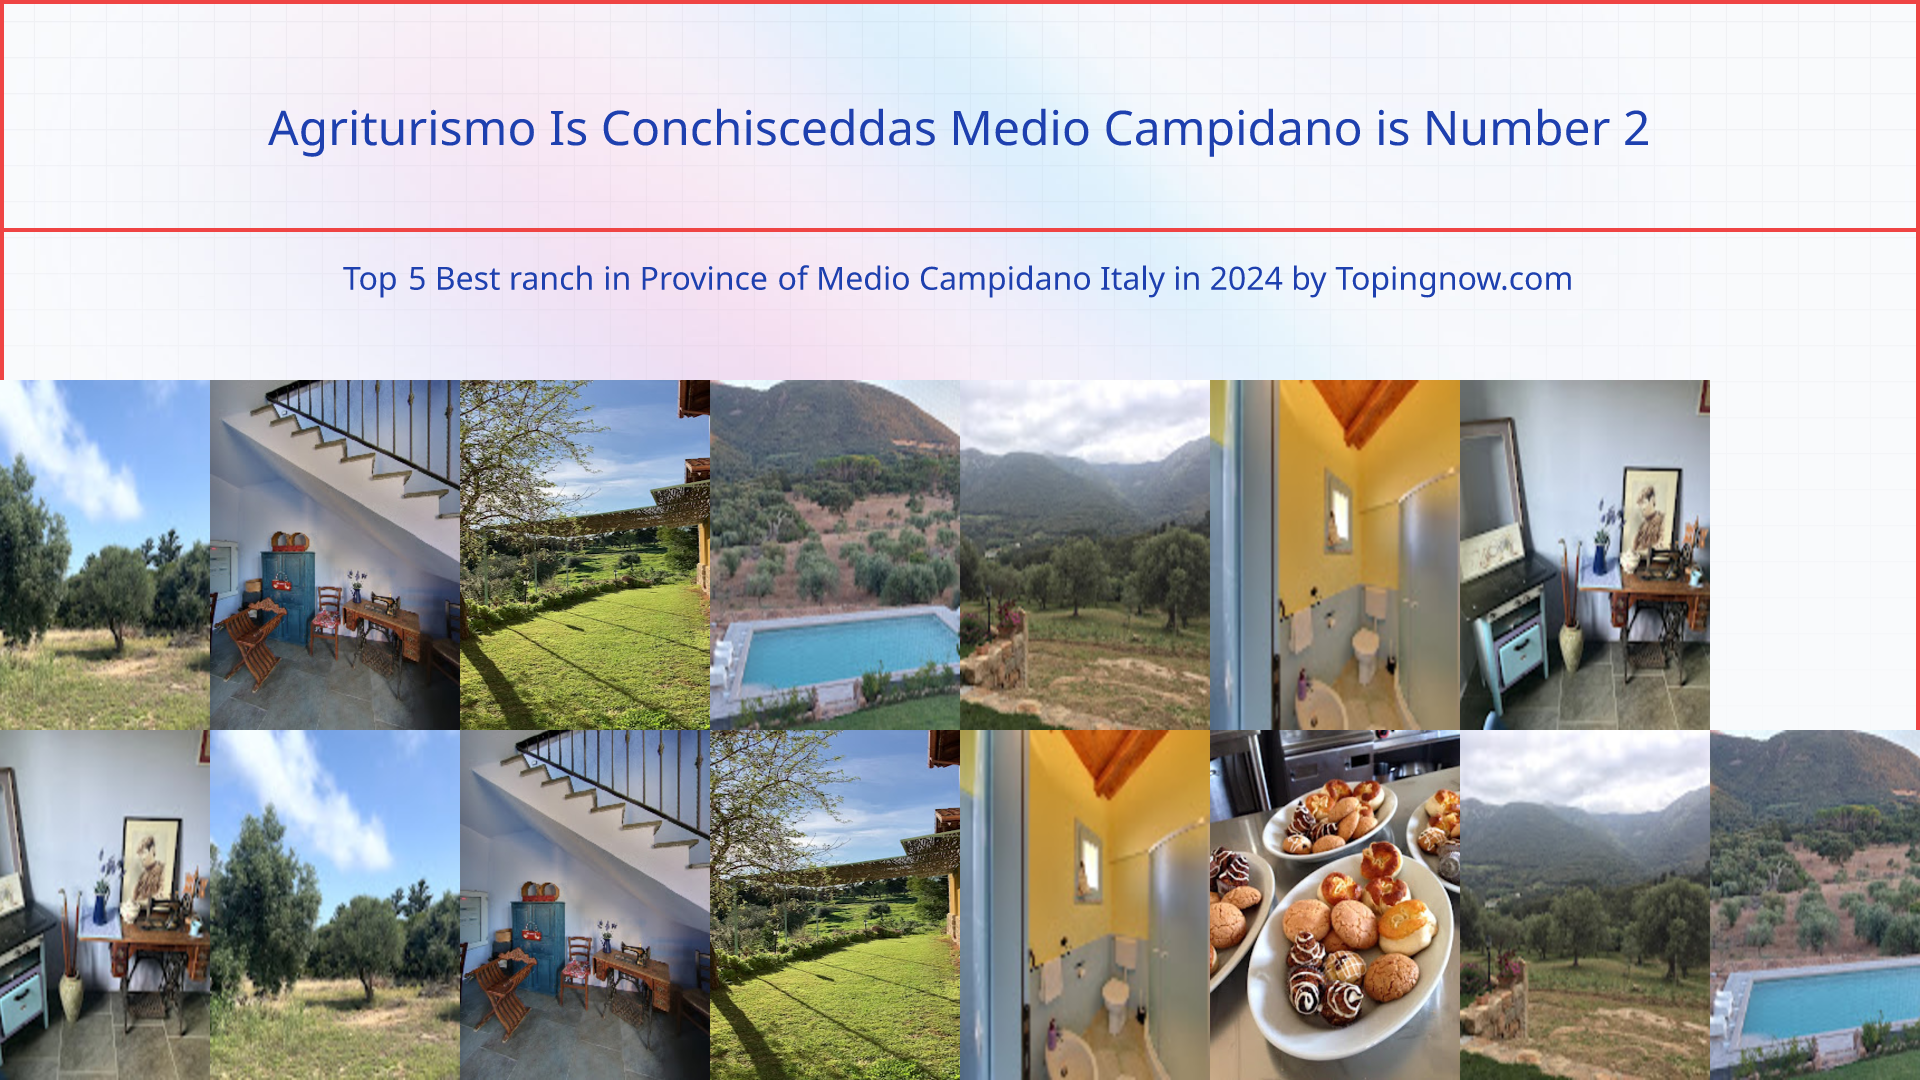 Agriturismo Is Conchisceddas Medio Campidano: Top 5 Best ranch in Province of Medio Campidano Italy in 2024